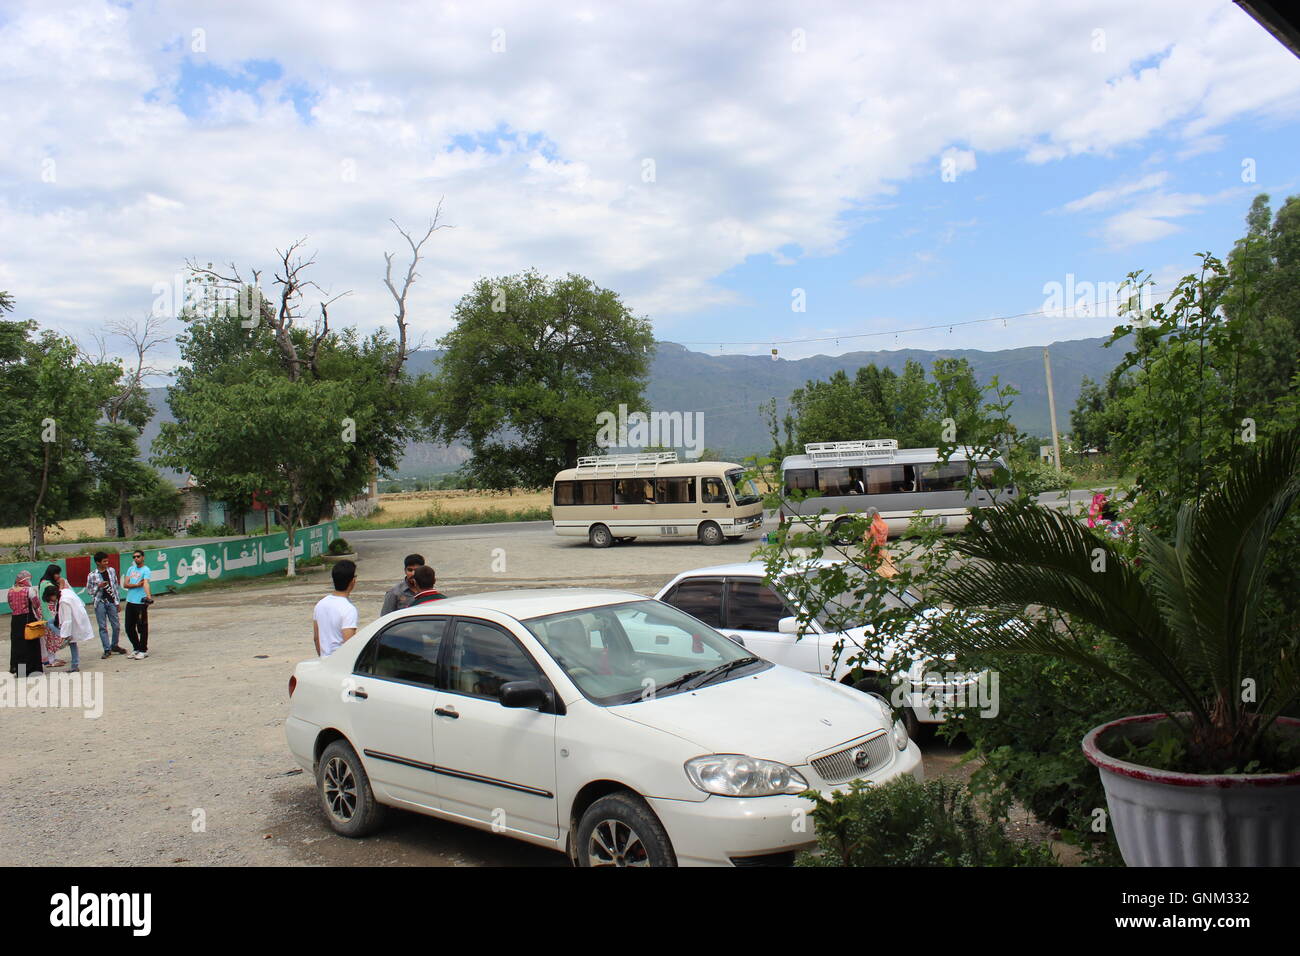 A wide shot of a white car, with two buses in the background, people in groups chatting, and a mountain range in the background. Stock Photo